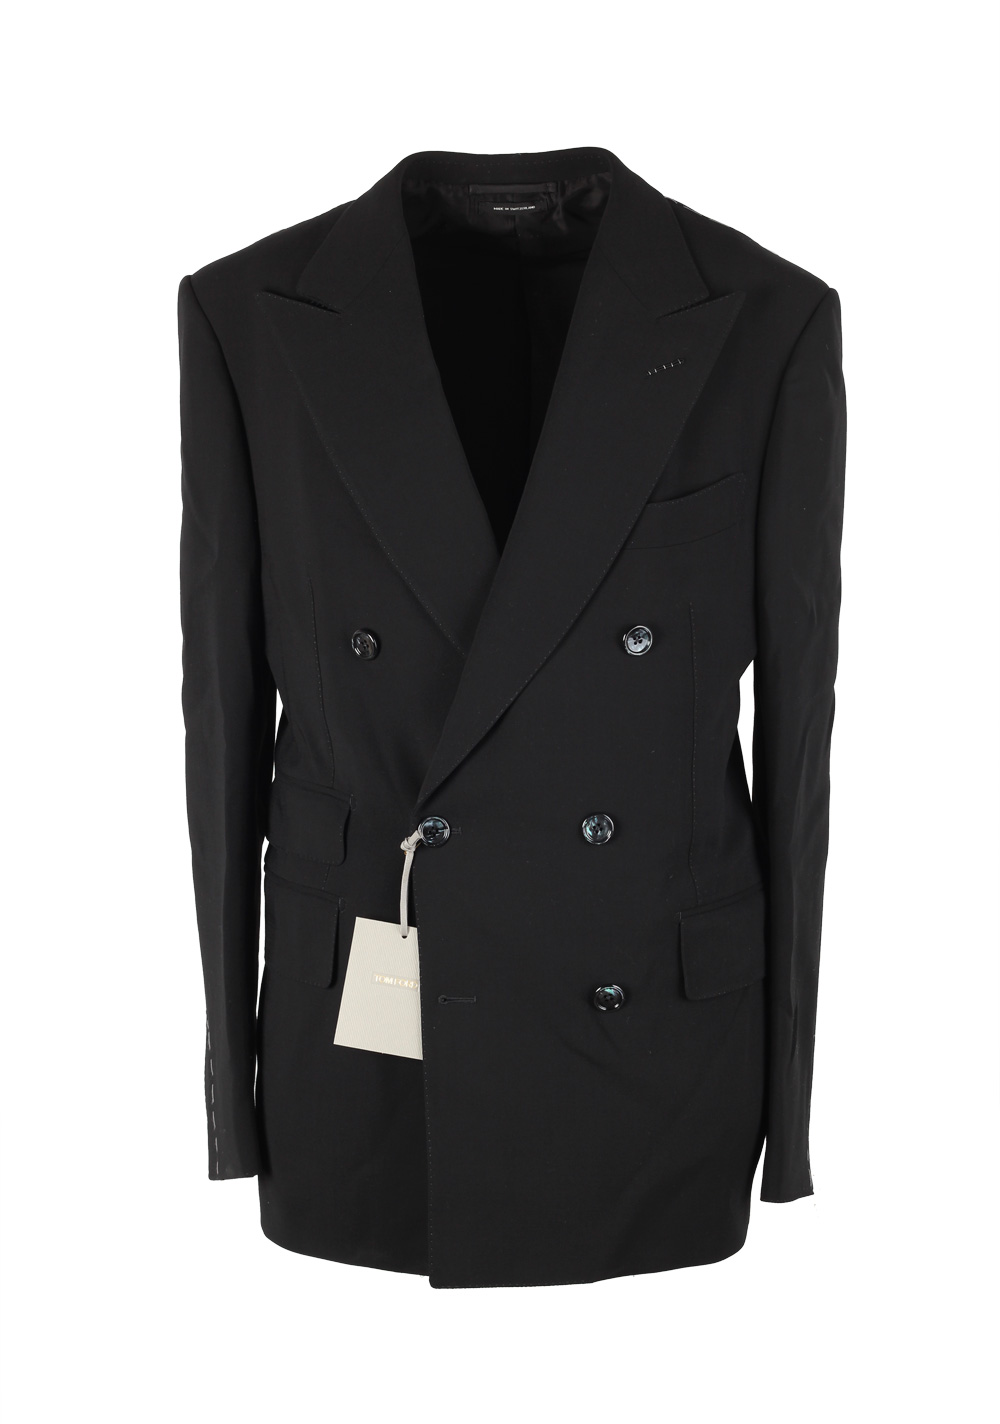 TOM FORD Shelton Double Breasted Solid Black Suit Size 50 / 40R U.S ...